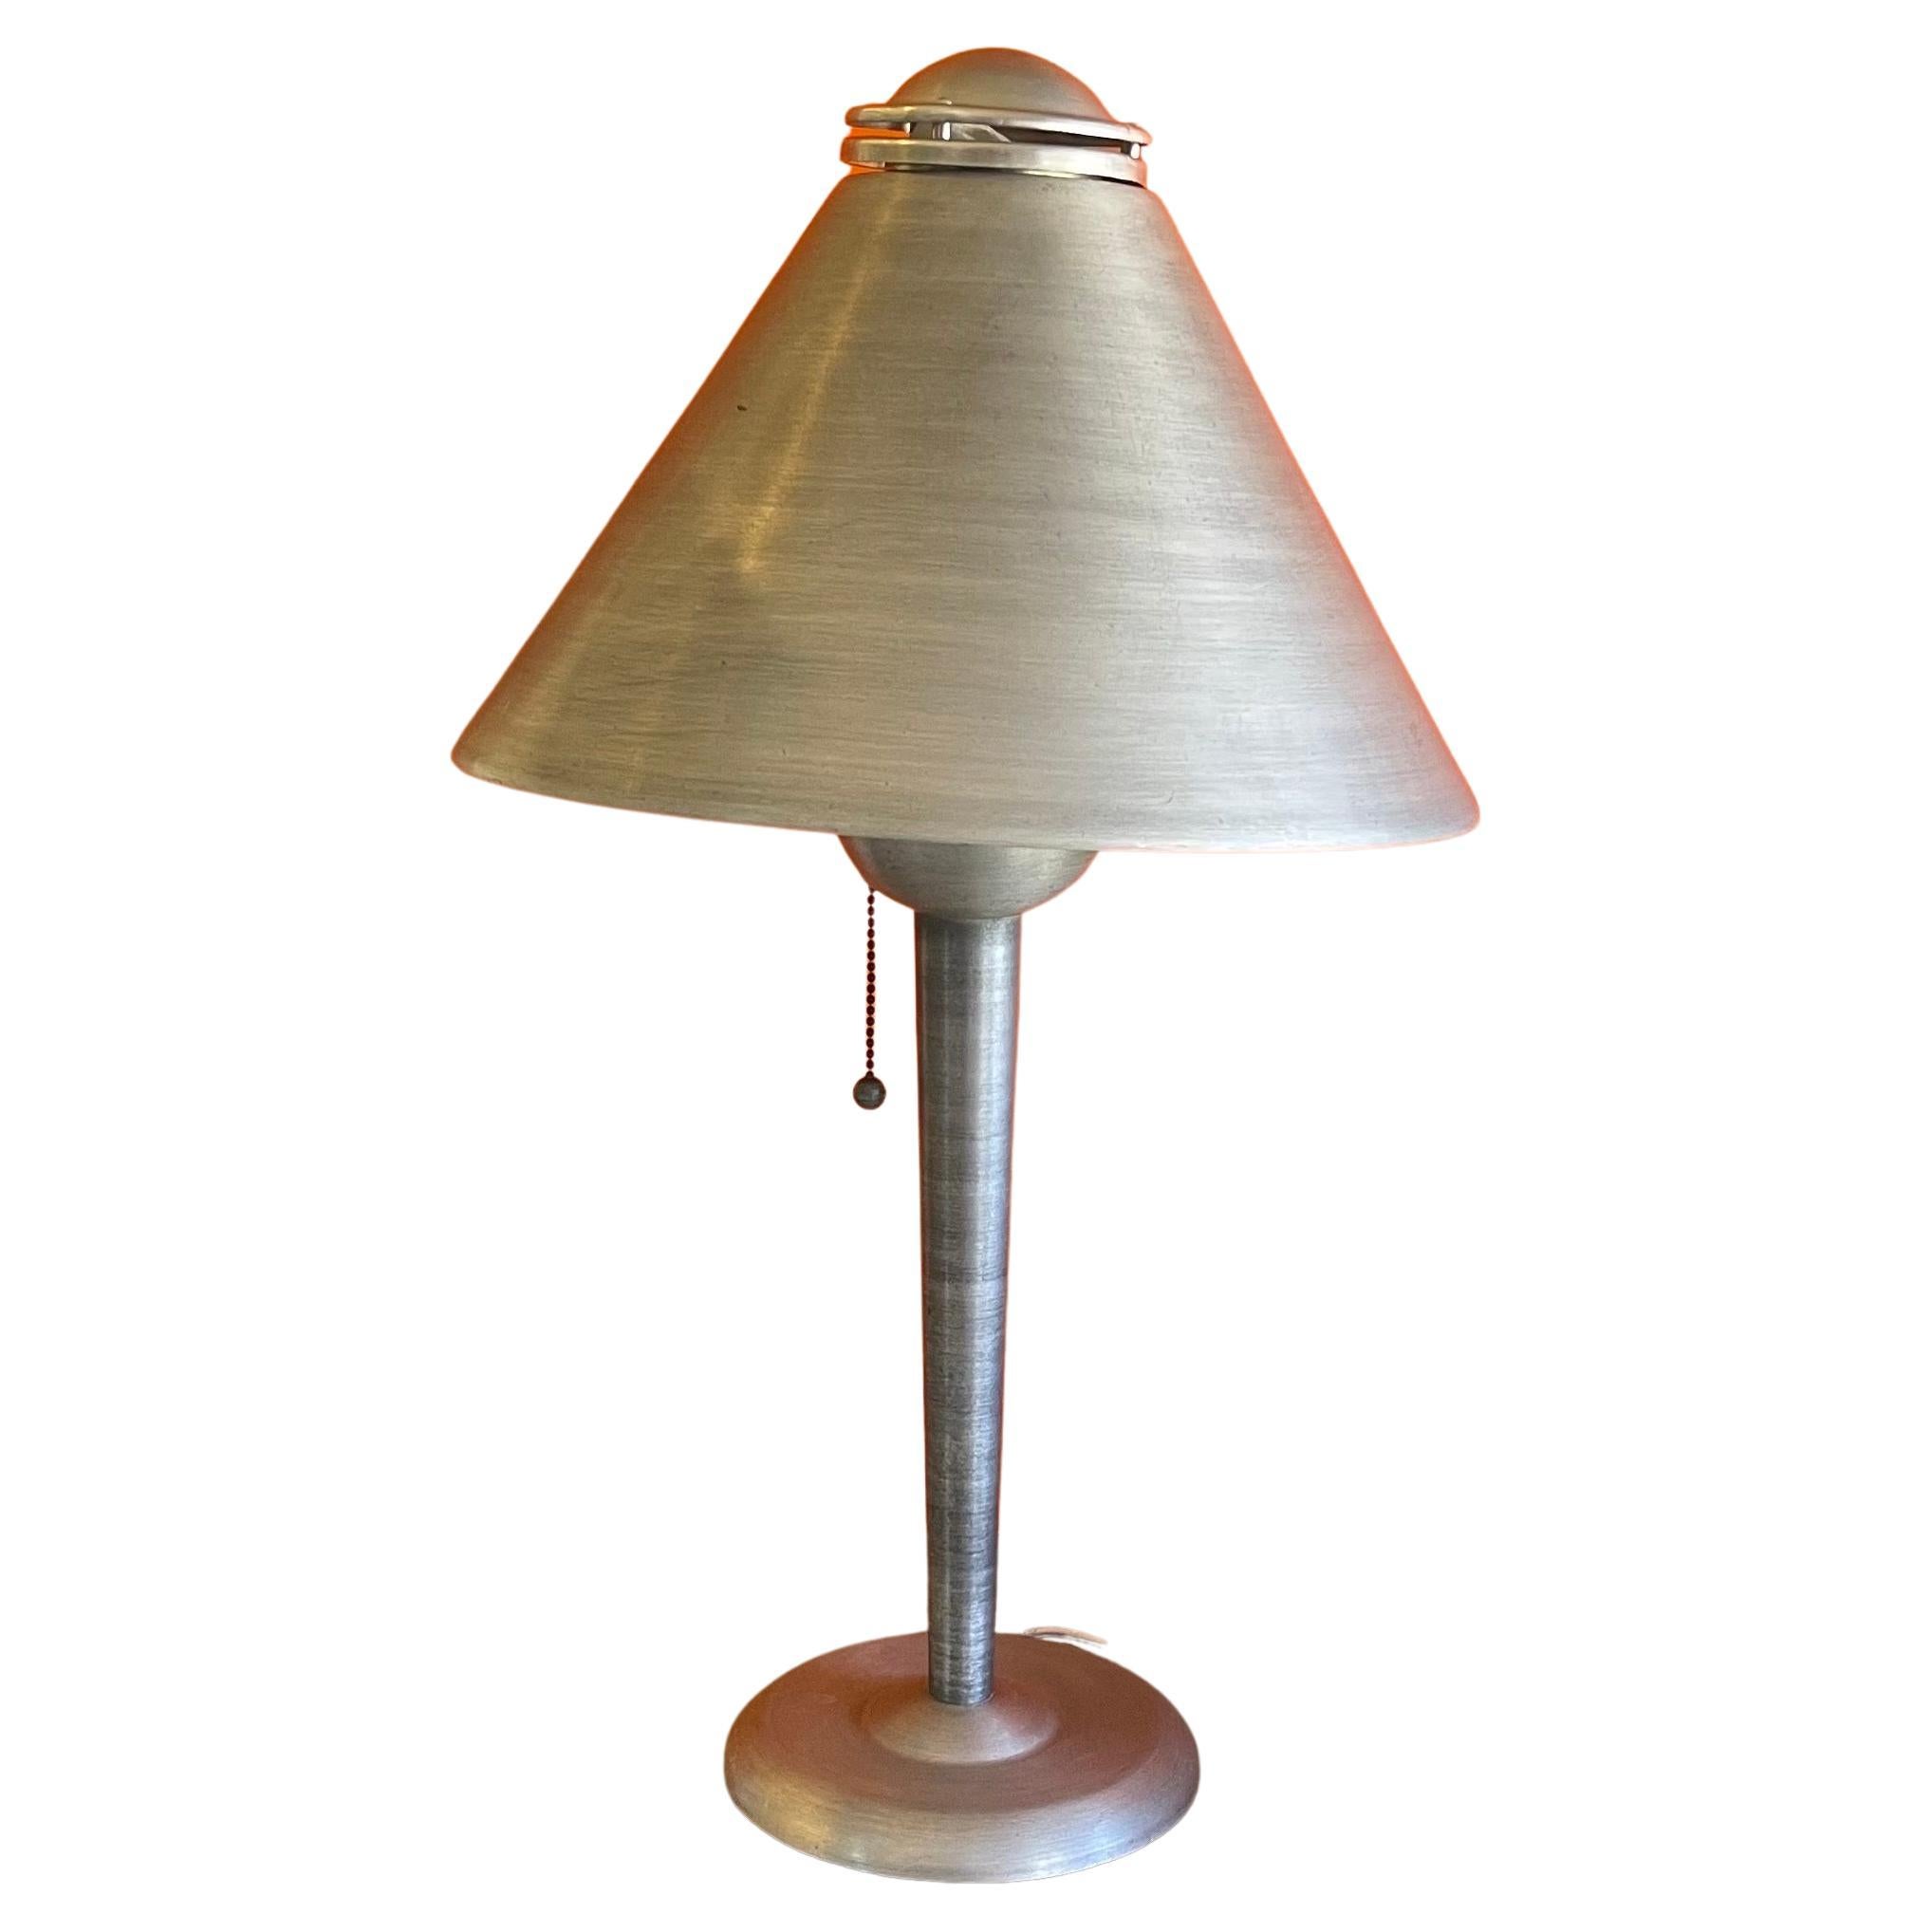 Art Deco Machine Age Brushed Aluminum Table Lamp by Soundrite Corporation